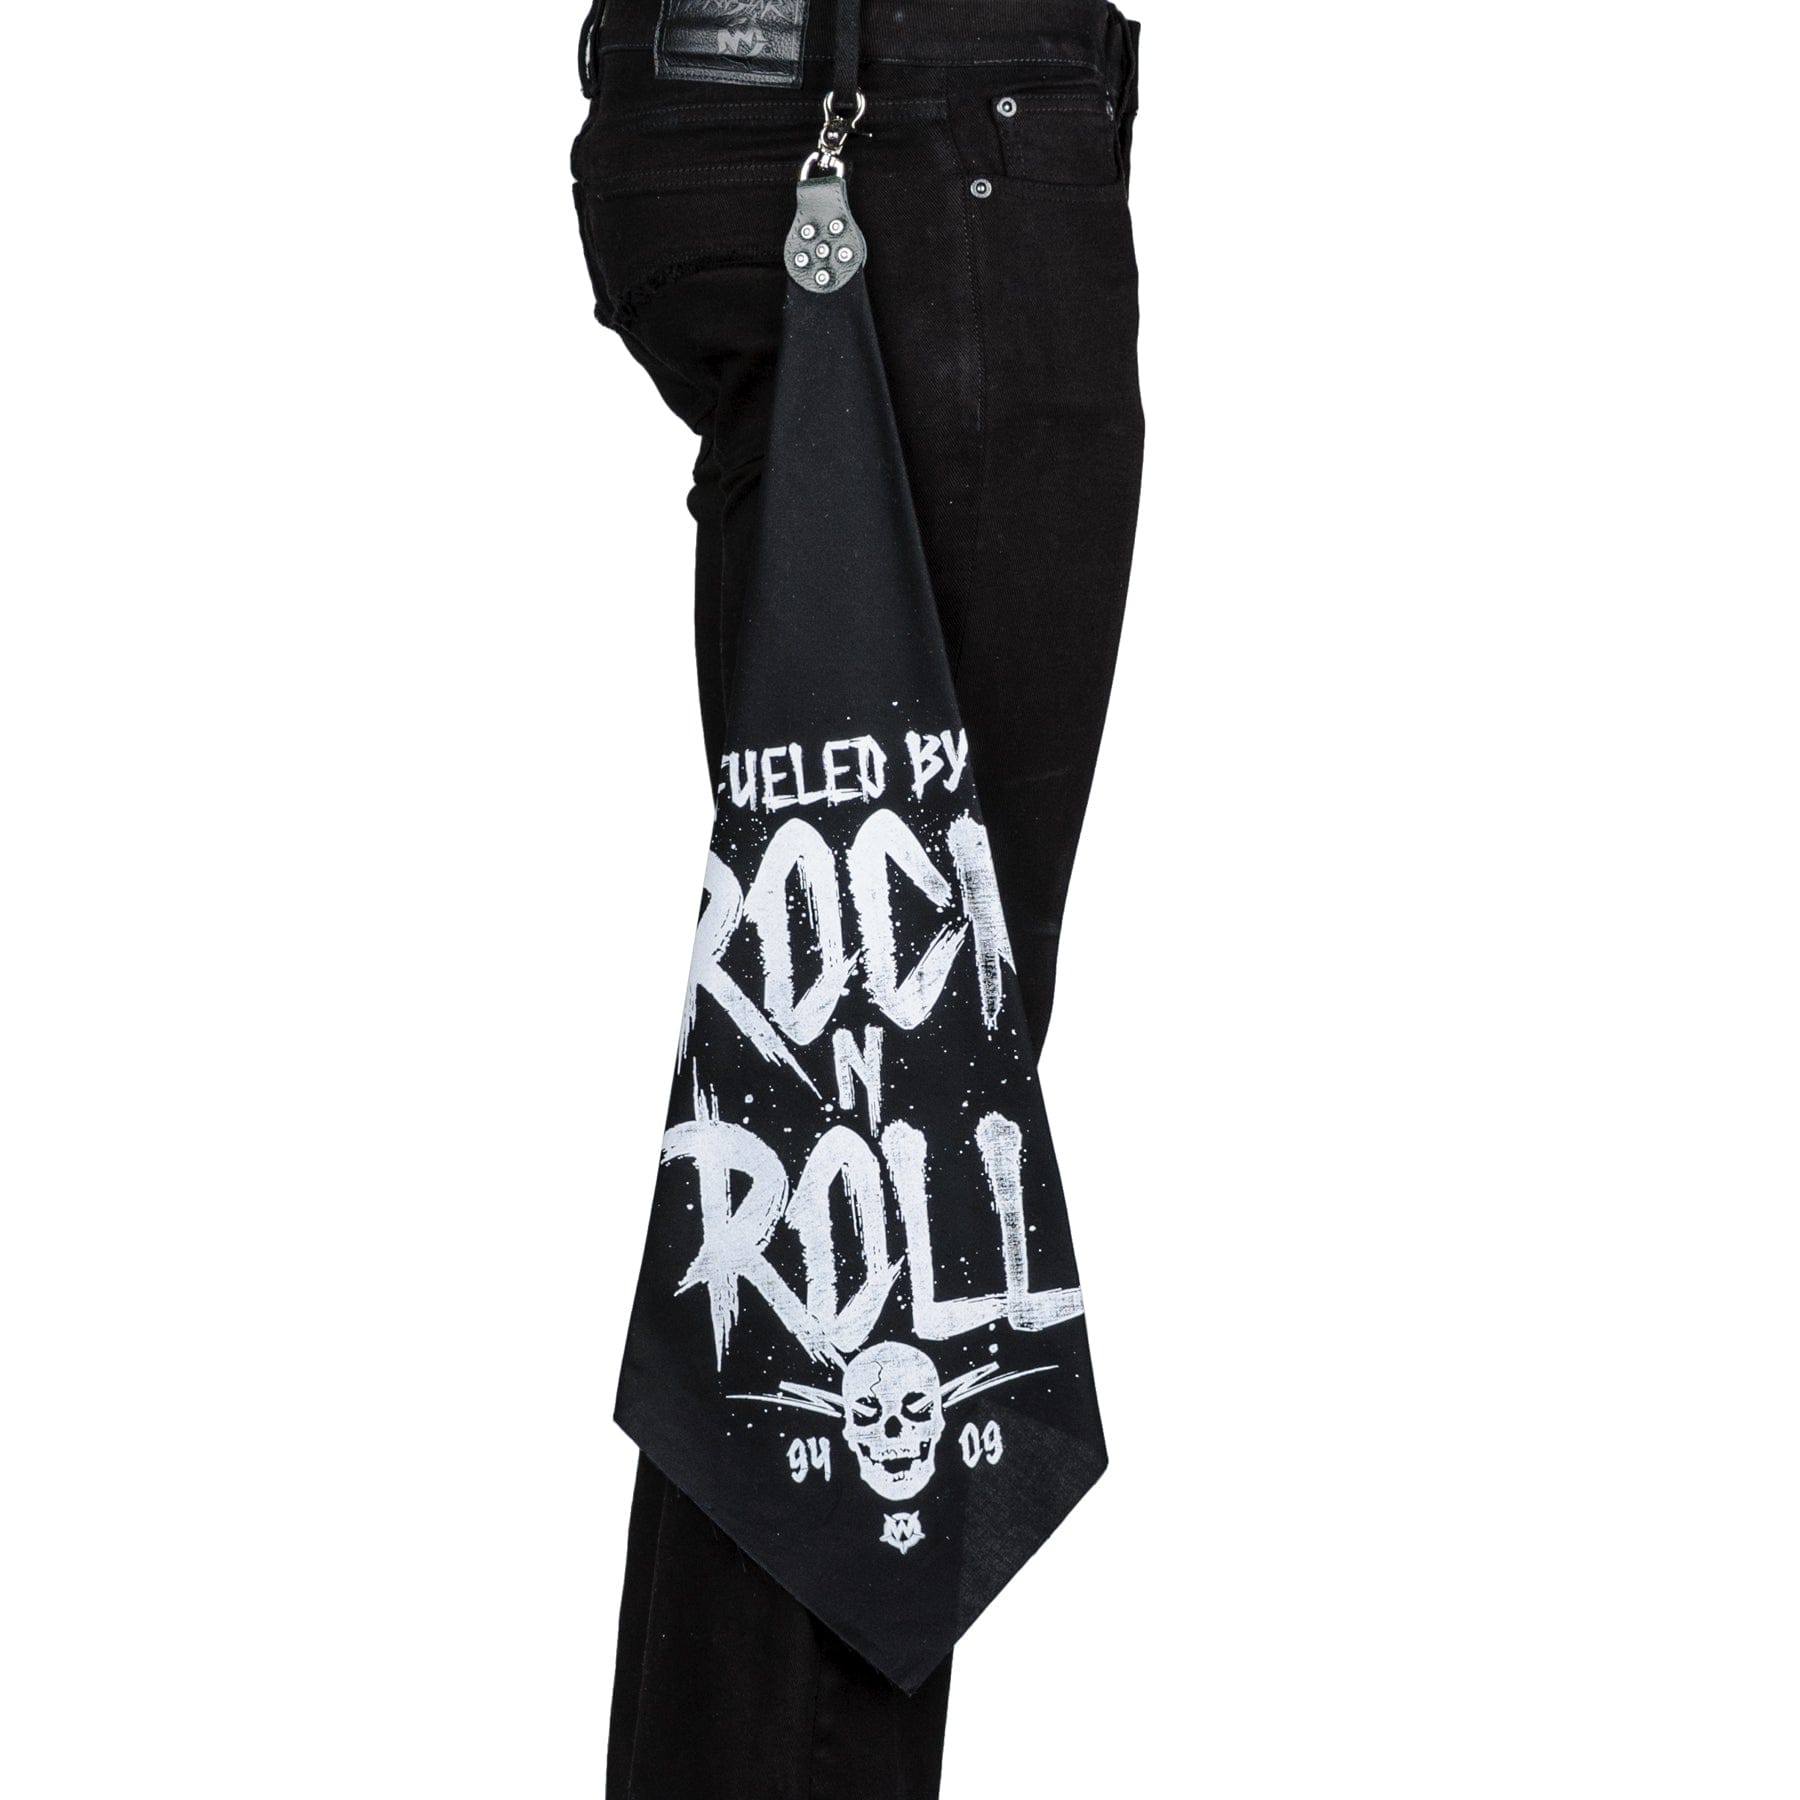 • Wornstar Custom Stage Wear Collection• Designed, made, and sold exclusively by Wornstar Clothing• Ready to ship• Custom, handmade and hand-printed• Wornstar Belt Flair™ • Rock N Roll Stage Accessory• Leather top • Attaches directly to your belt loop with a trigger clip• Swivel clip for movement• 